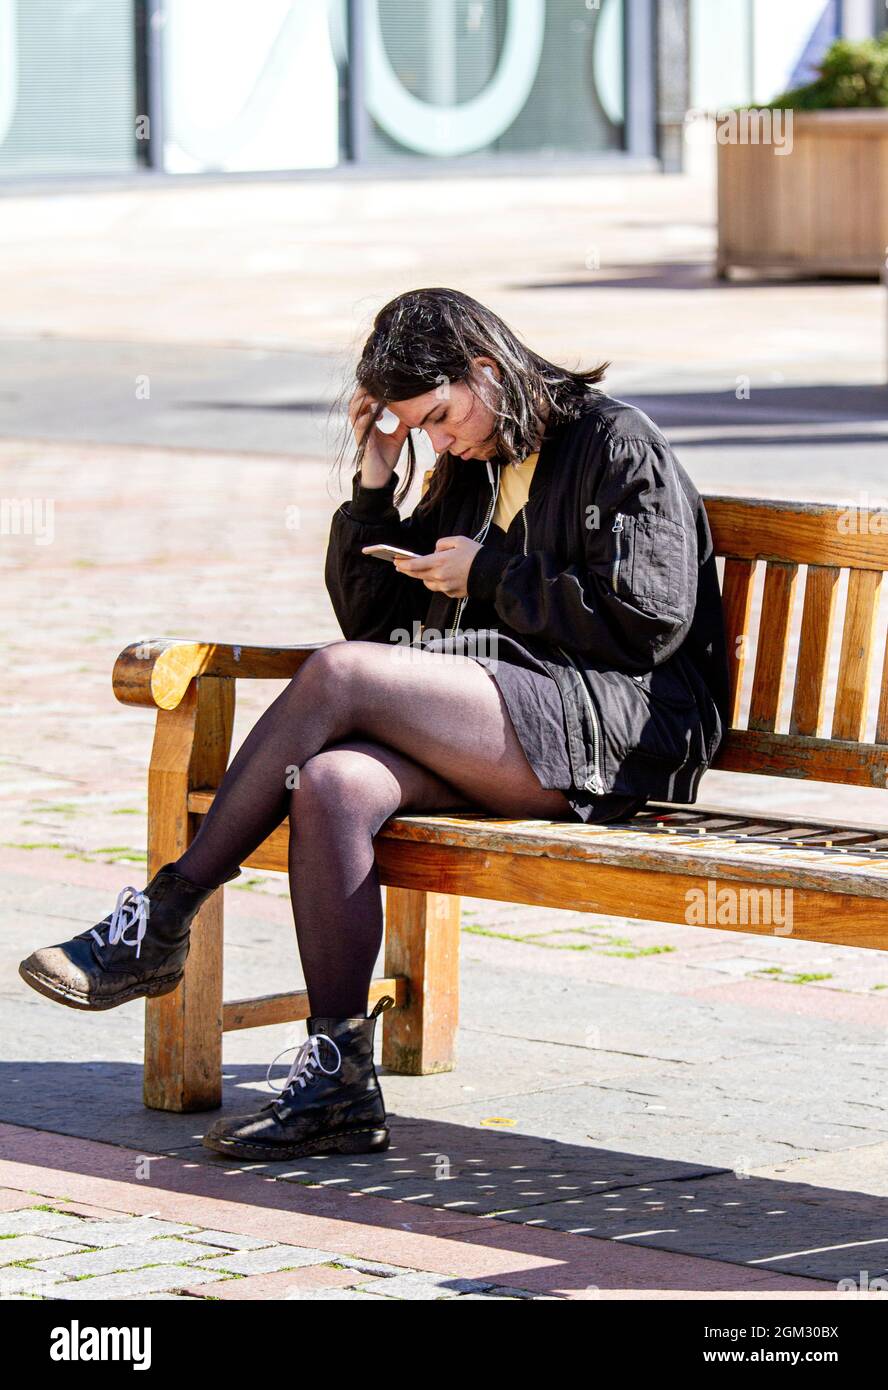 Dundee, Tayside, Scotland, UK. 16th Sep, 2021. UK weather: Warm mid September sunshine across North East Scotland with temperatures reaching 19°C. A young woman spending the day out enjoying the glorious warm sunny weather whilst texting messages on her mobile phone in Dundee city centre. Credit: Dundee Photographics/Alamy Live News Stock Photo